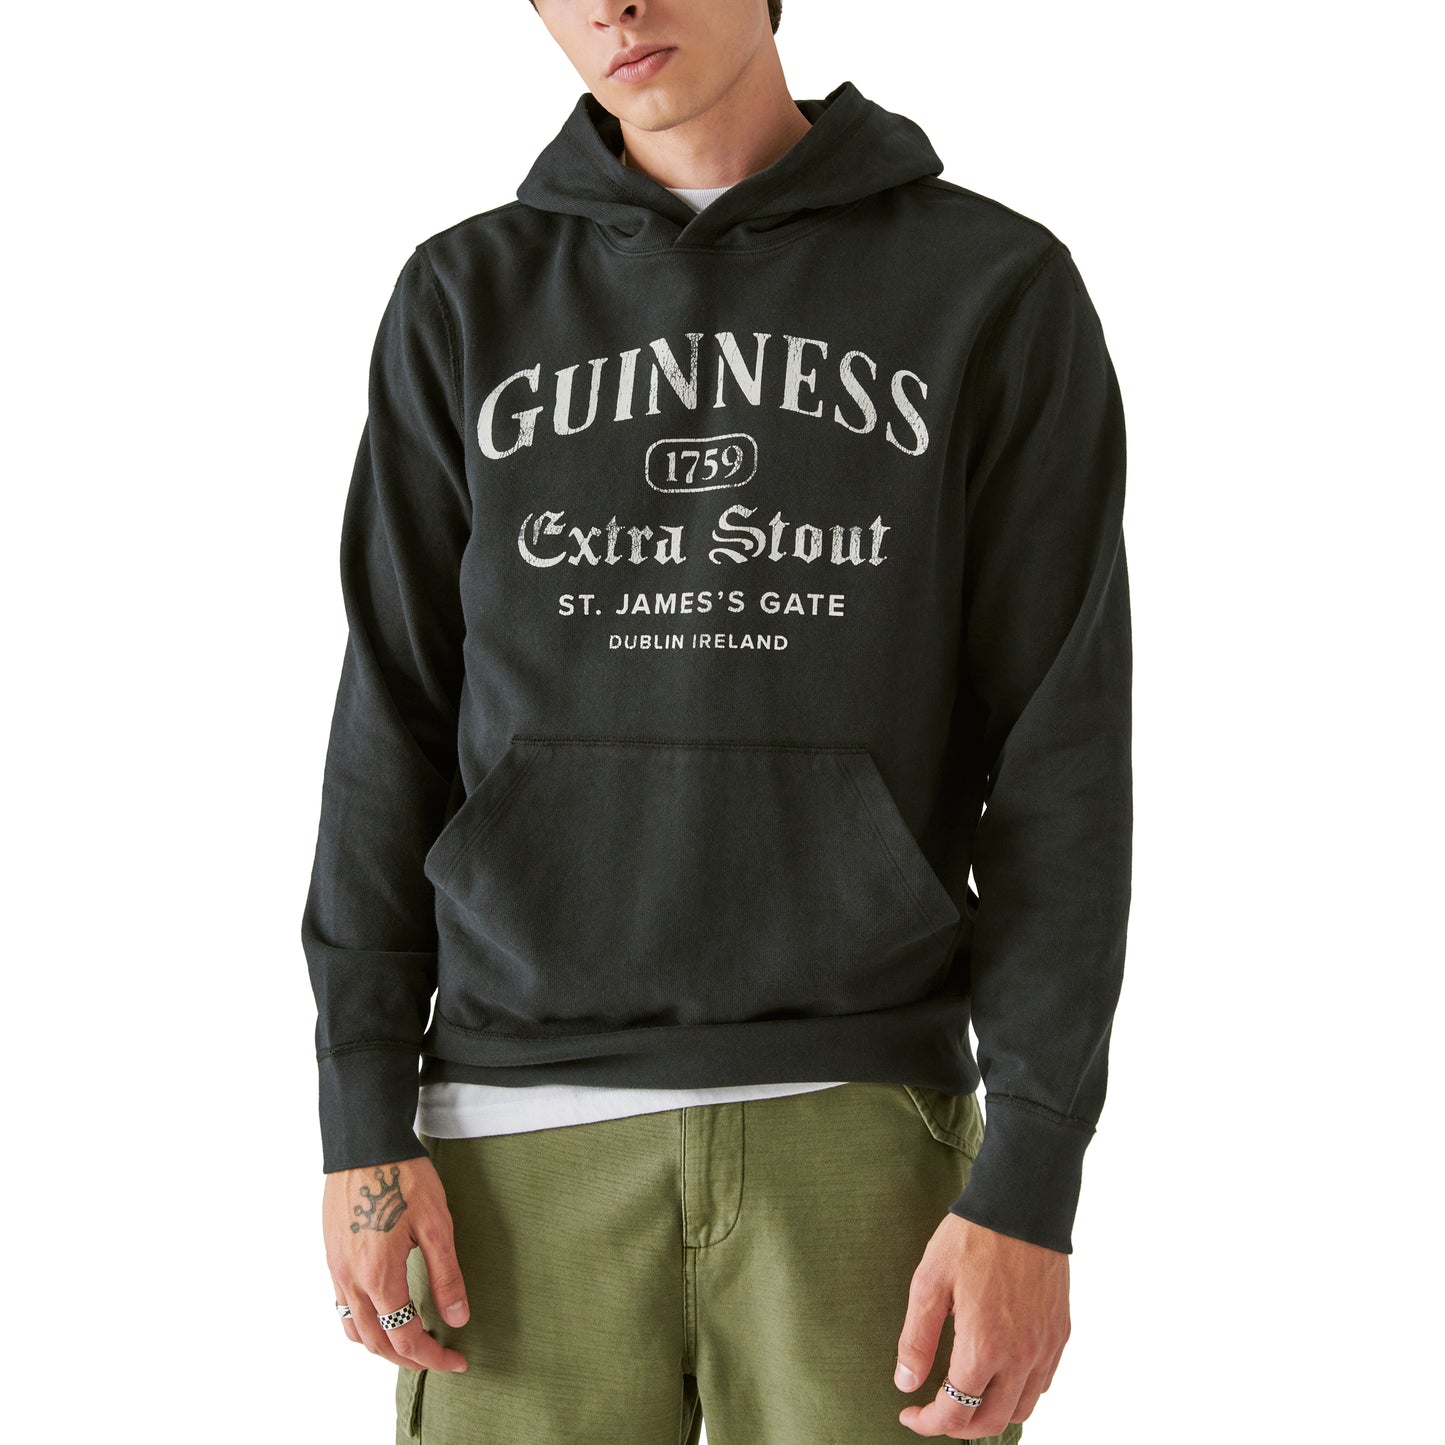 Limited edition Guinness Logo Hoodie from Guinness Webstore US.